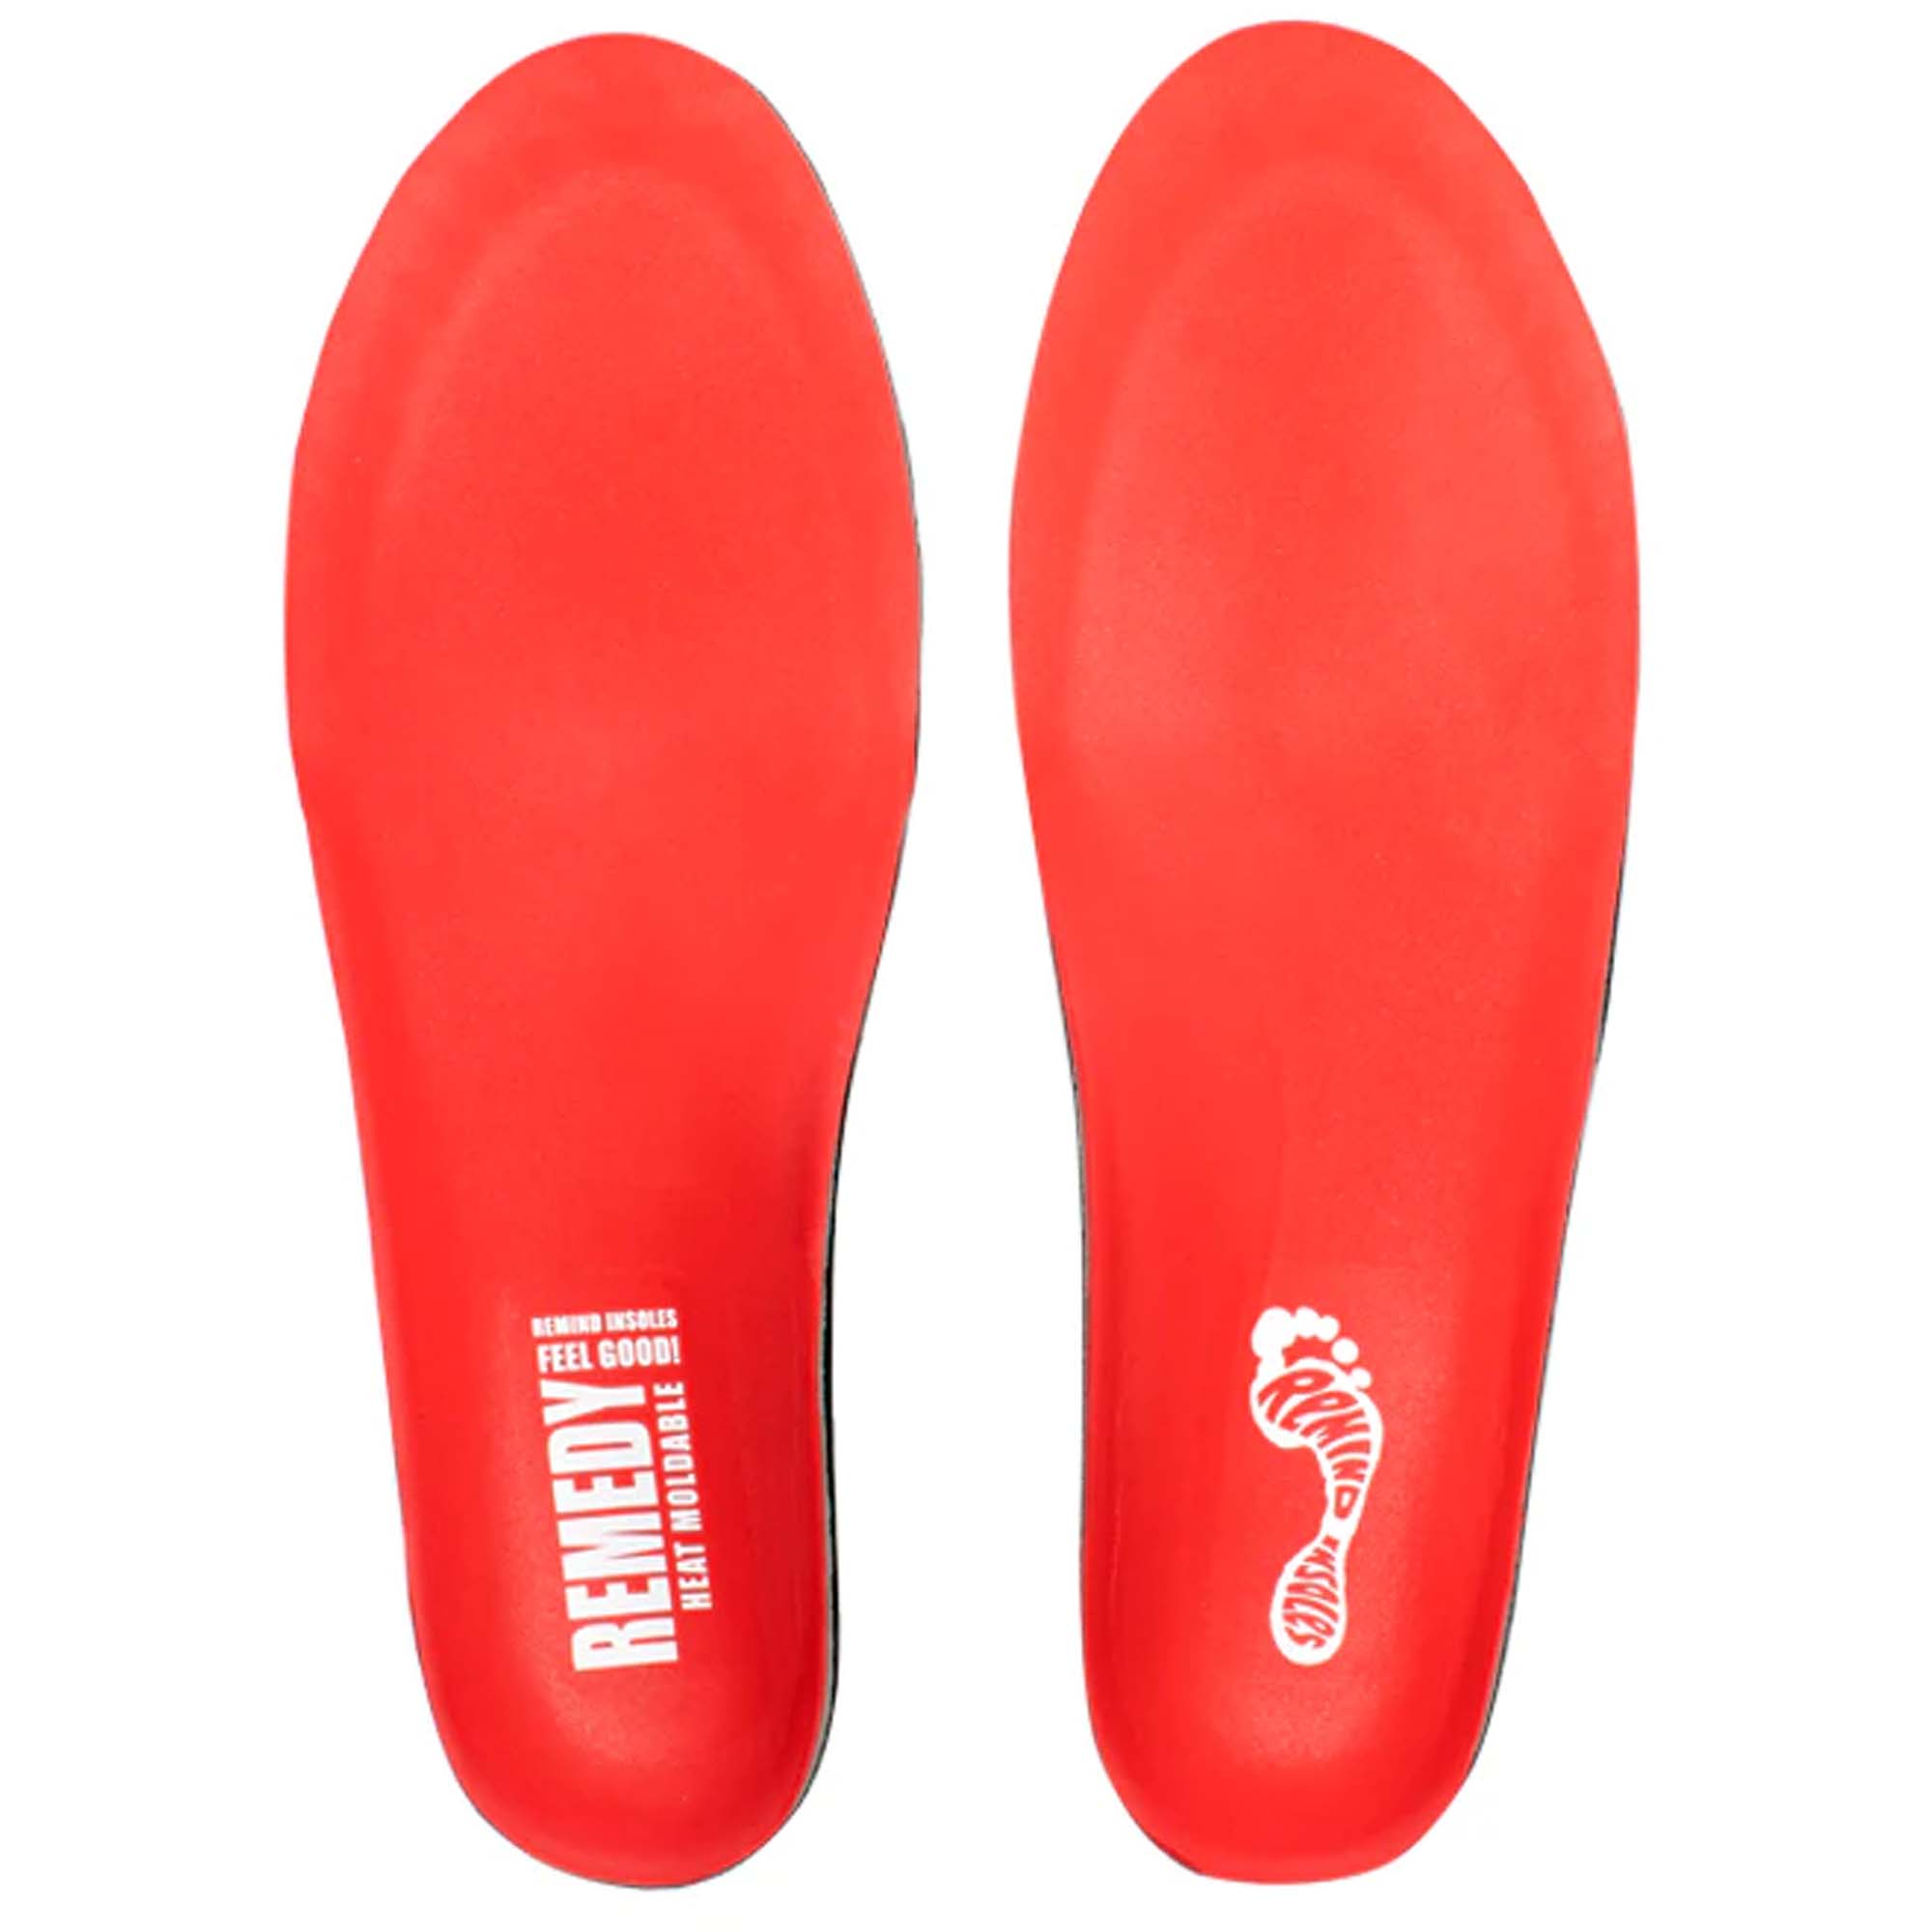 Remind Remedy Custom Arch Heat Moldable Insole